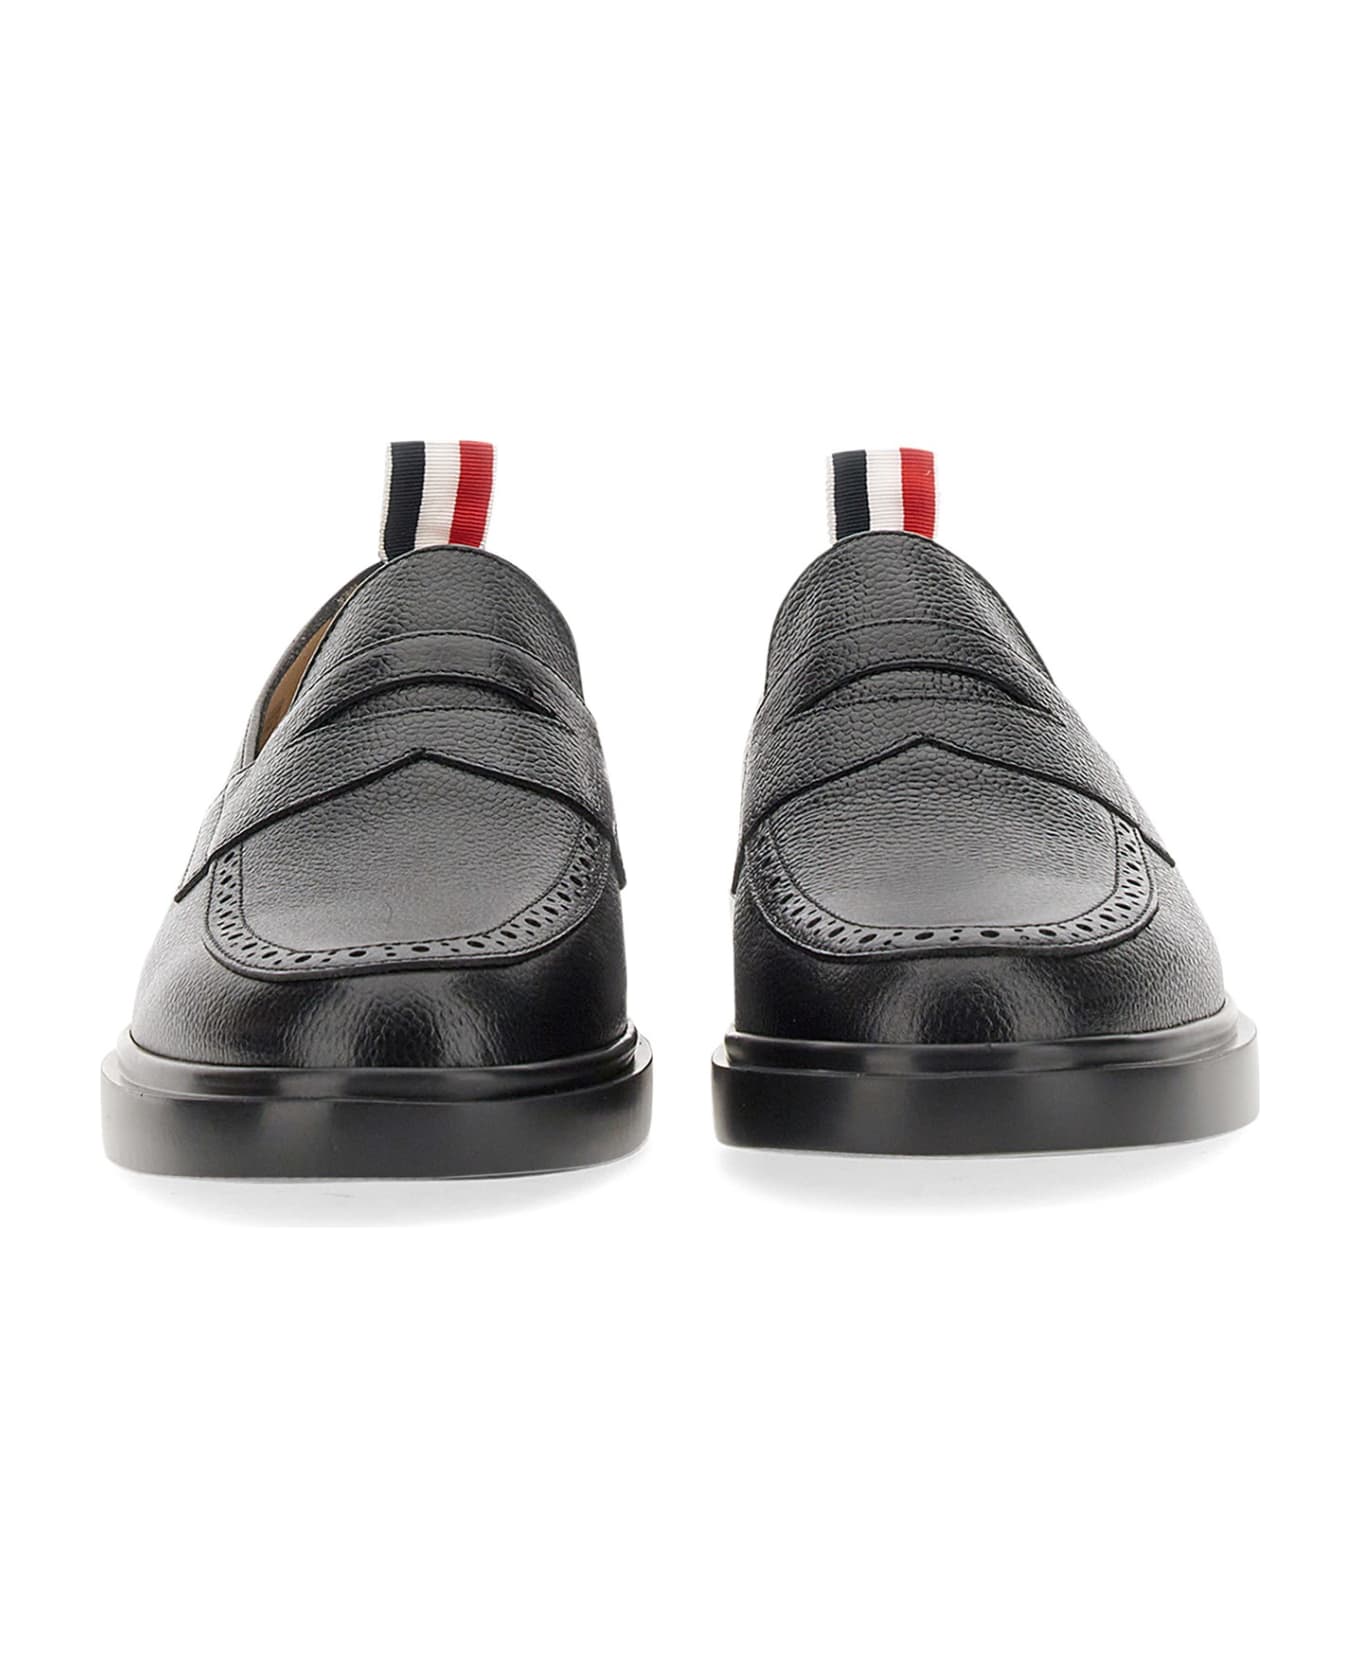 Thom Browne Penny Loafer - NERO